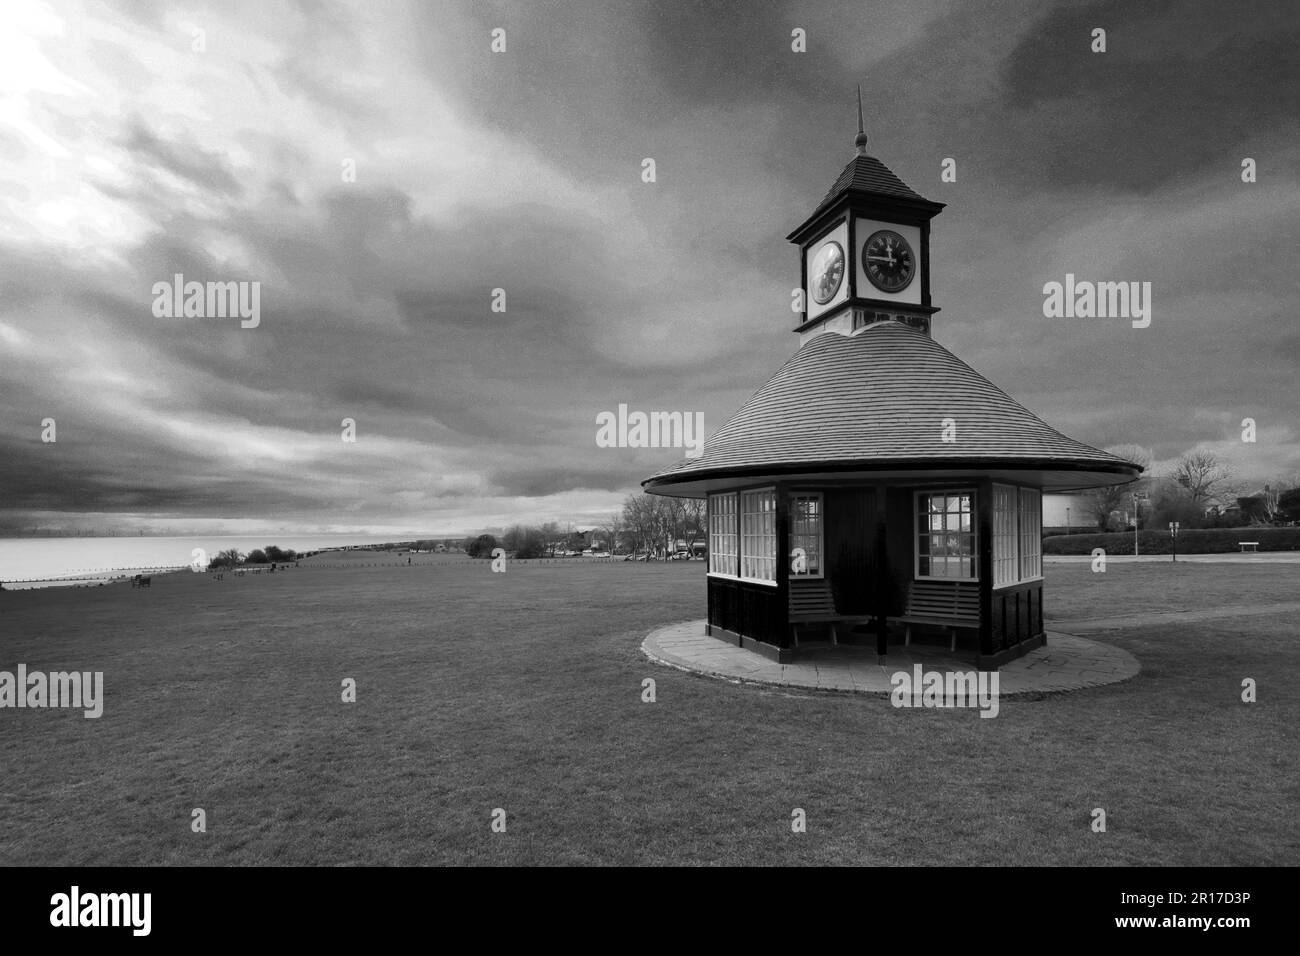 The Clock tower on the promenade at Frinton-on-Sea, Tendring district, Essex, England, UK Stock Photo